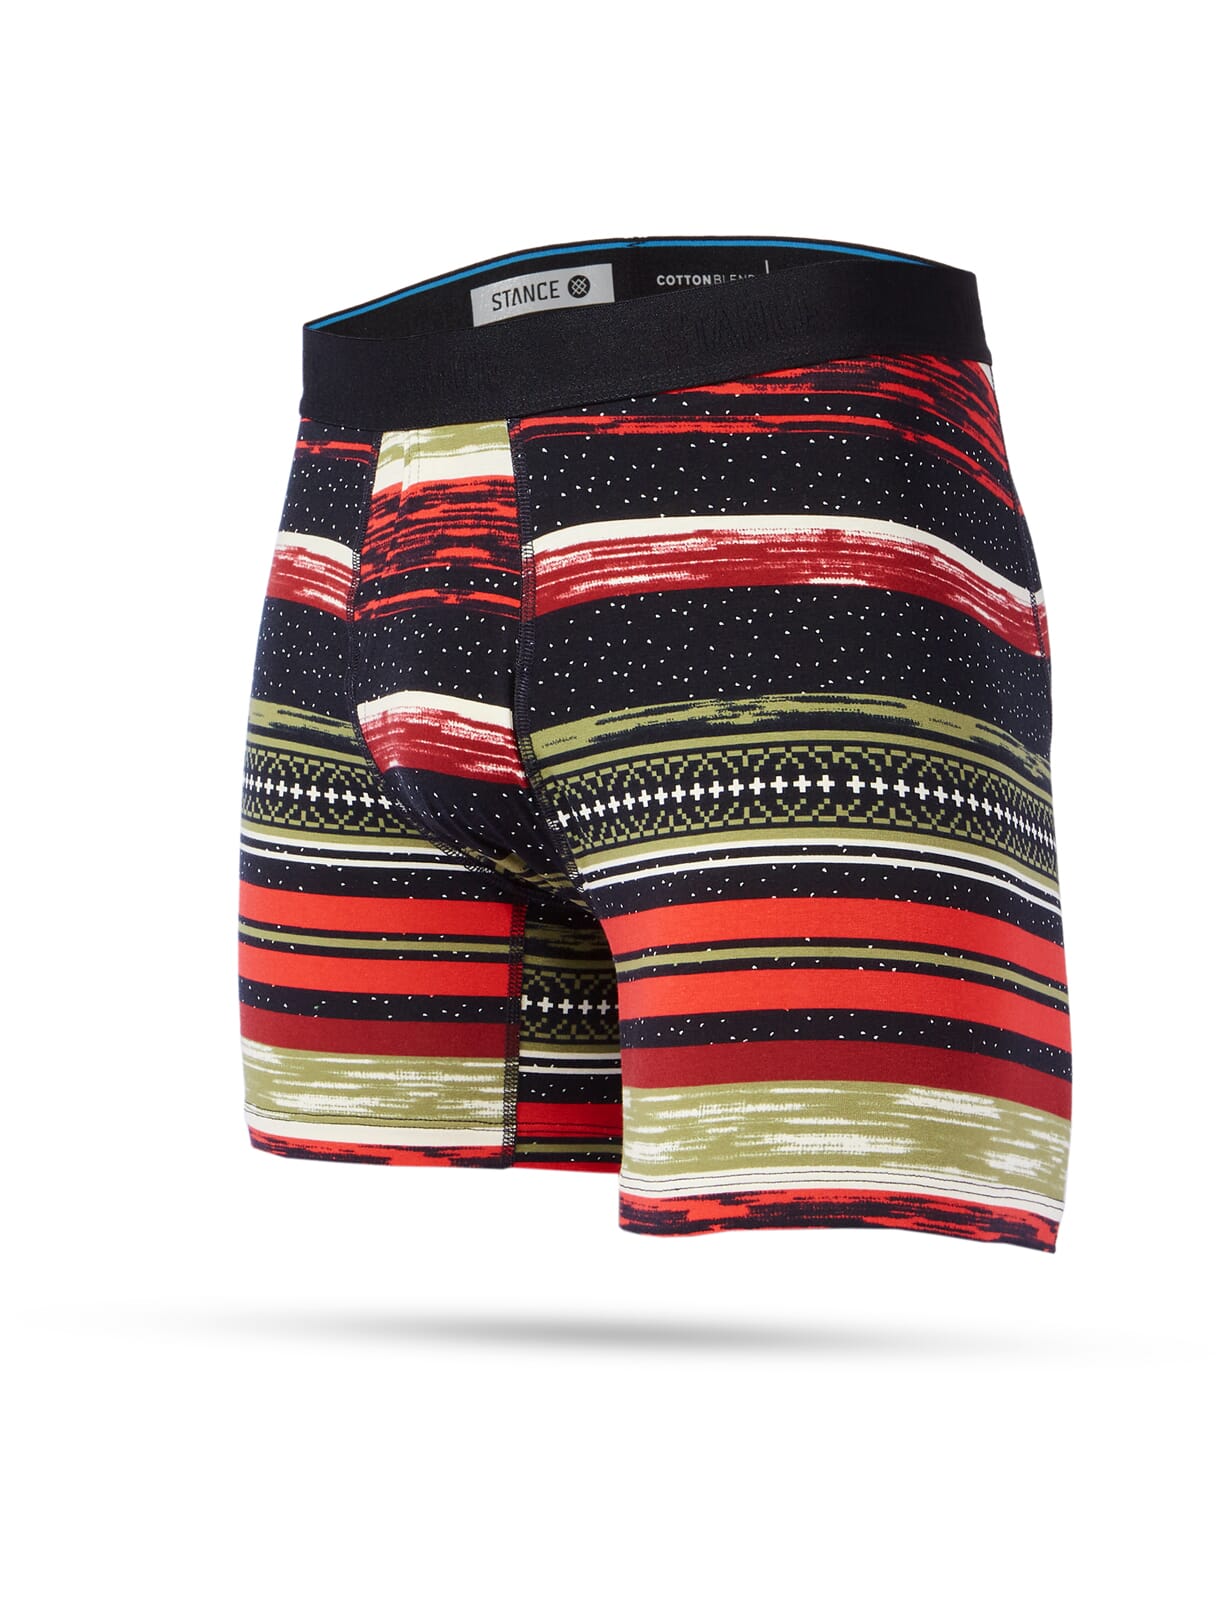 Stance Adams Wholester Boxers in Black